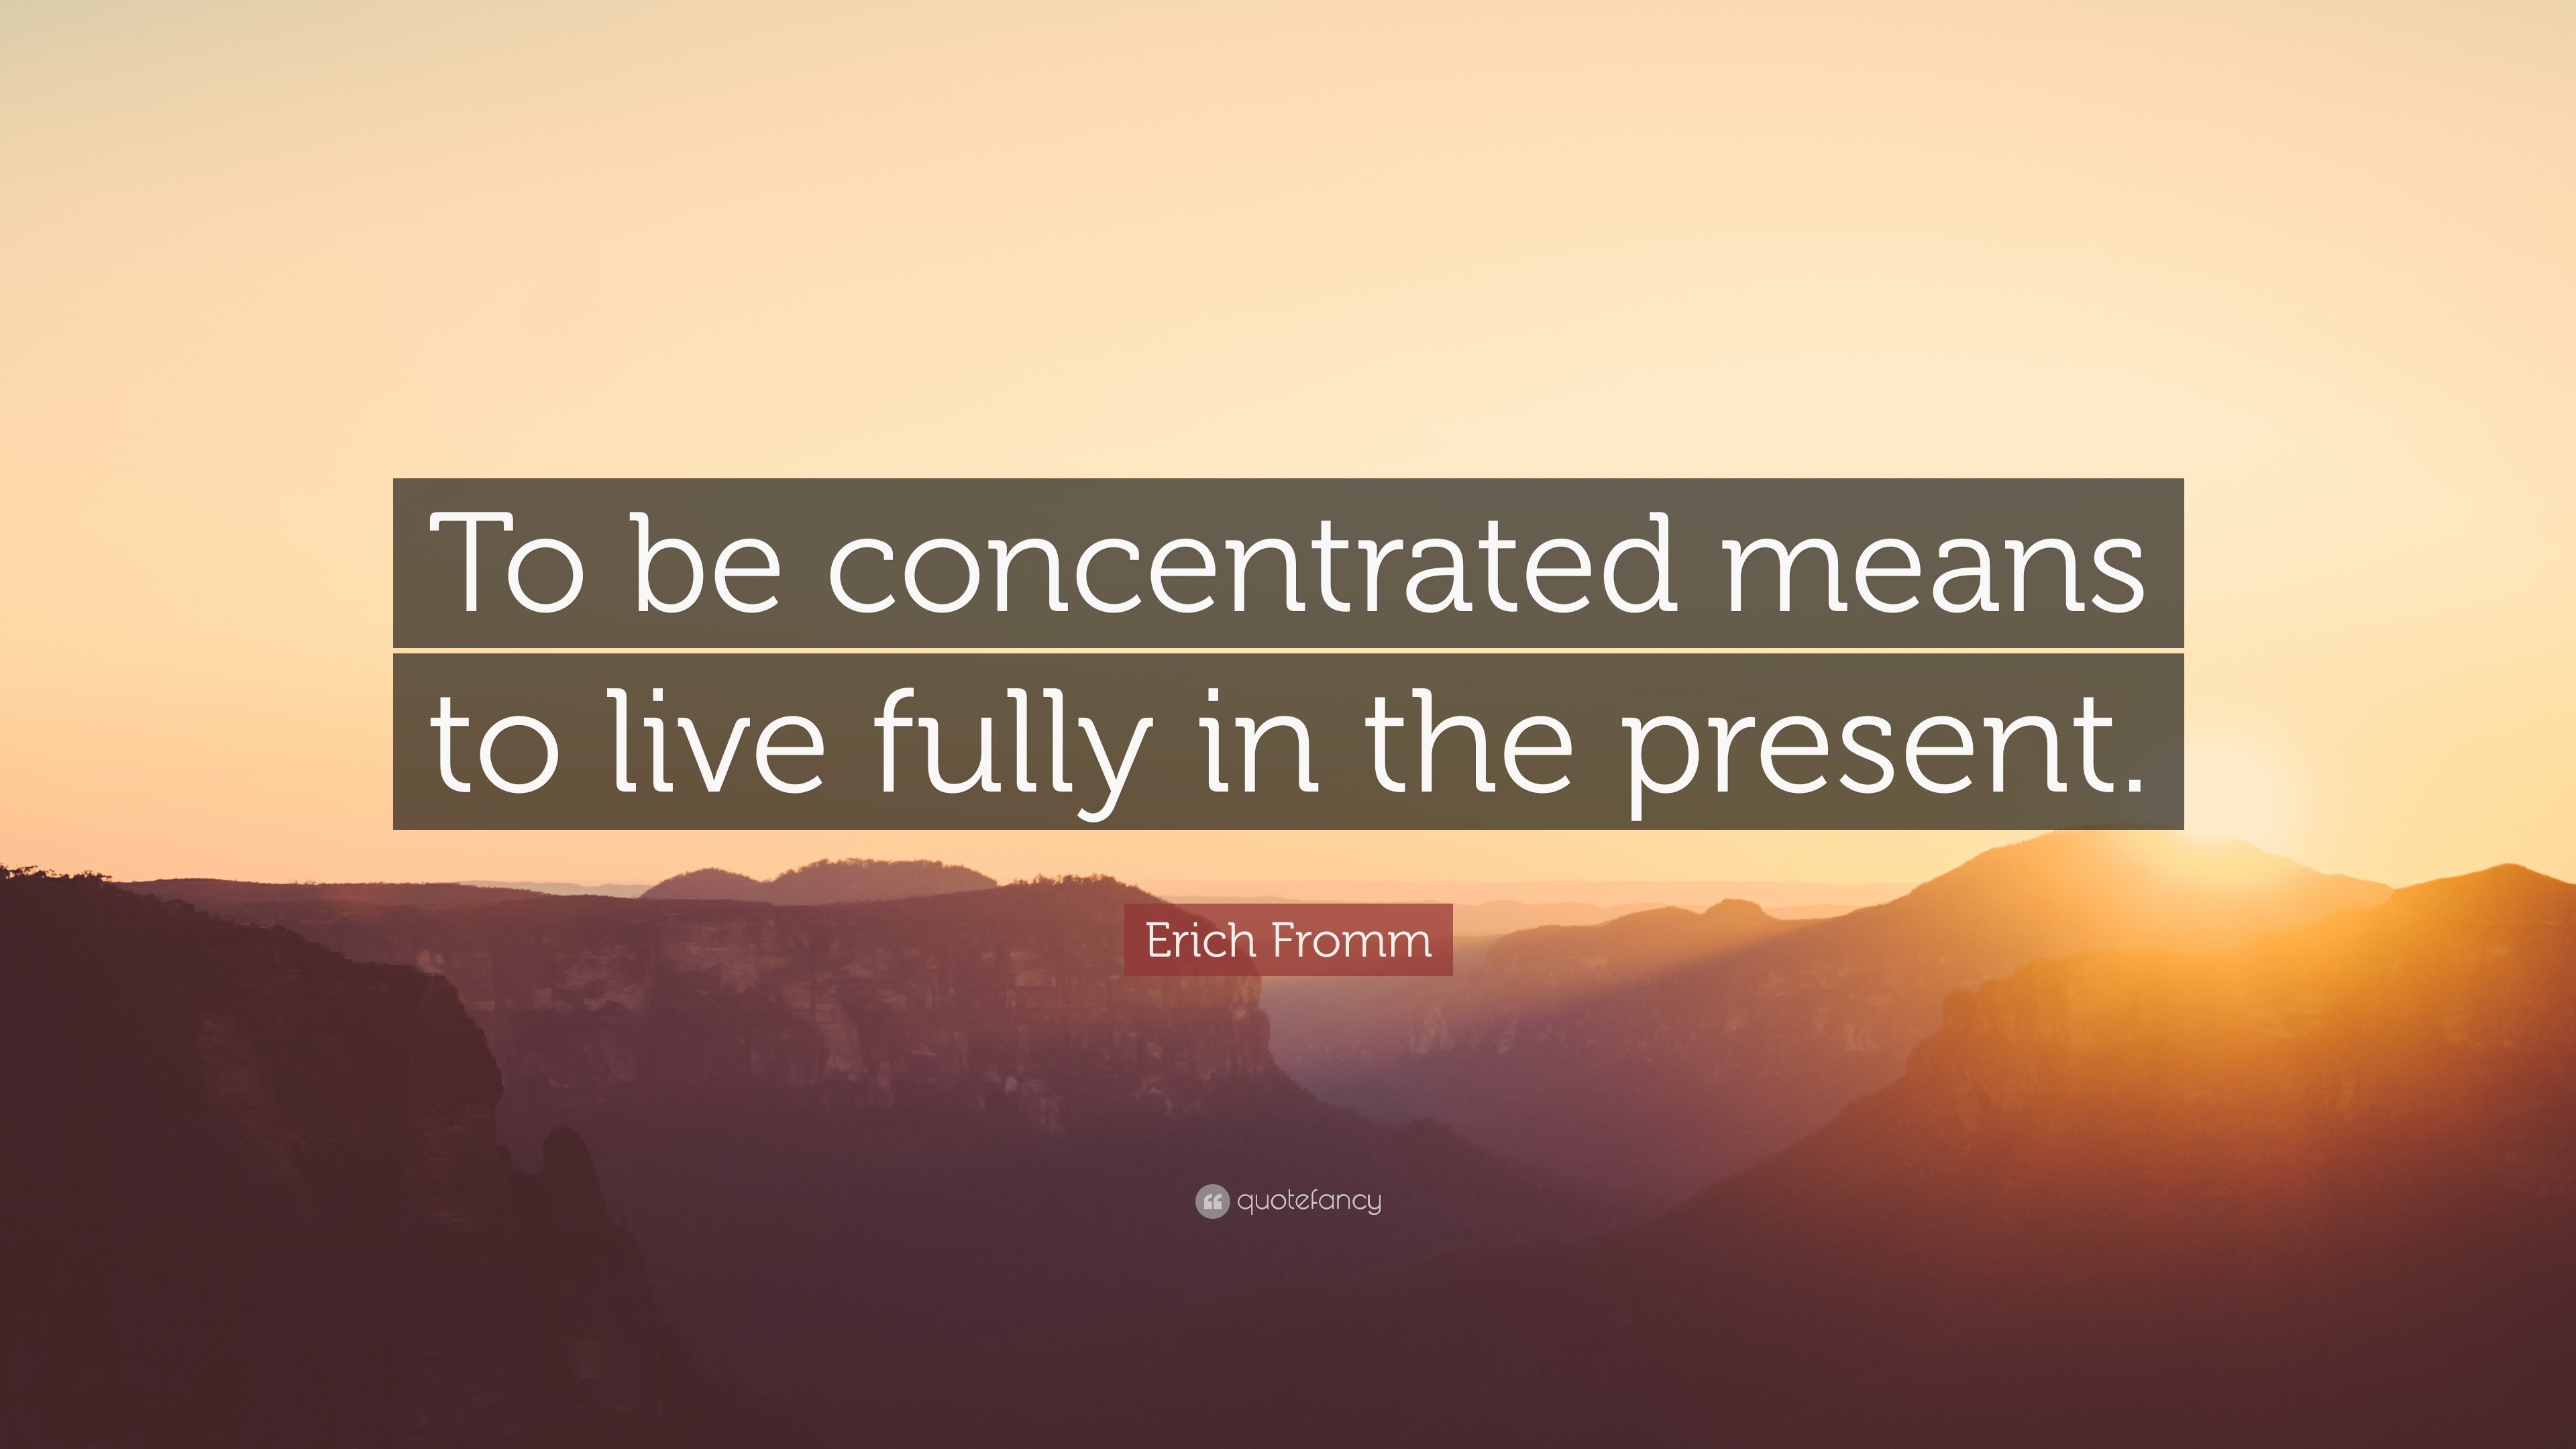 Erich Fromm Quote: “To be concentrated means to live fully in the present.”  (7 wallpapers) - Quotefancy